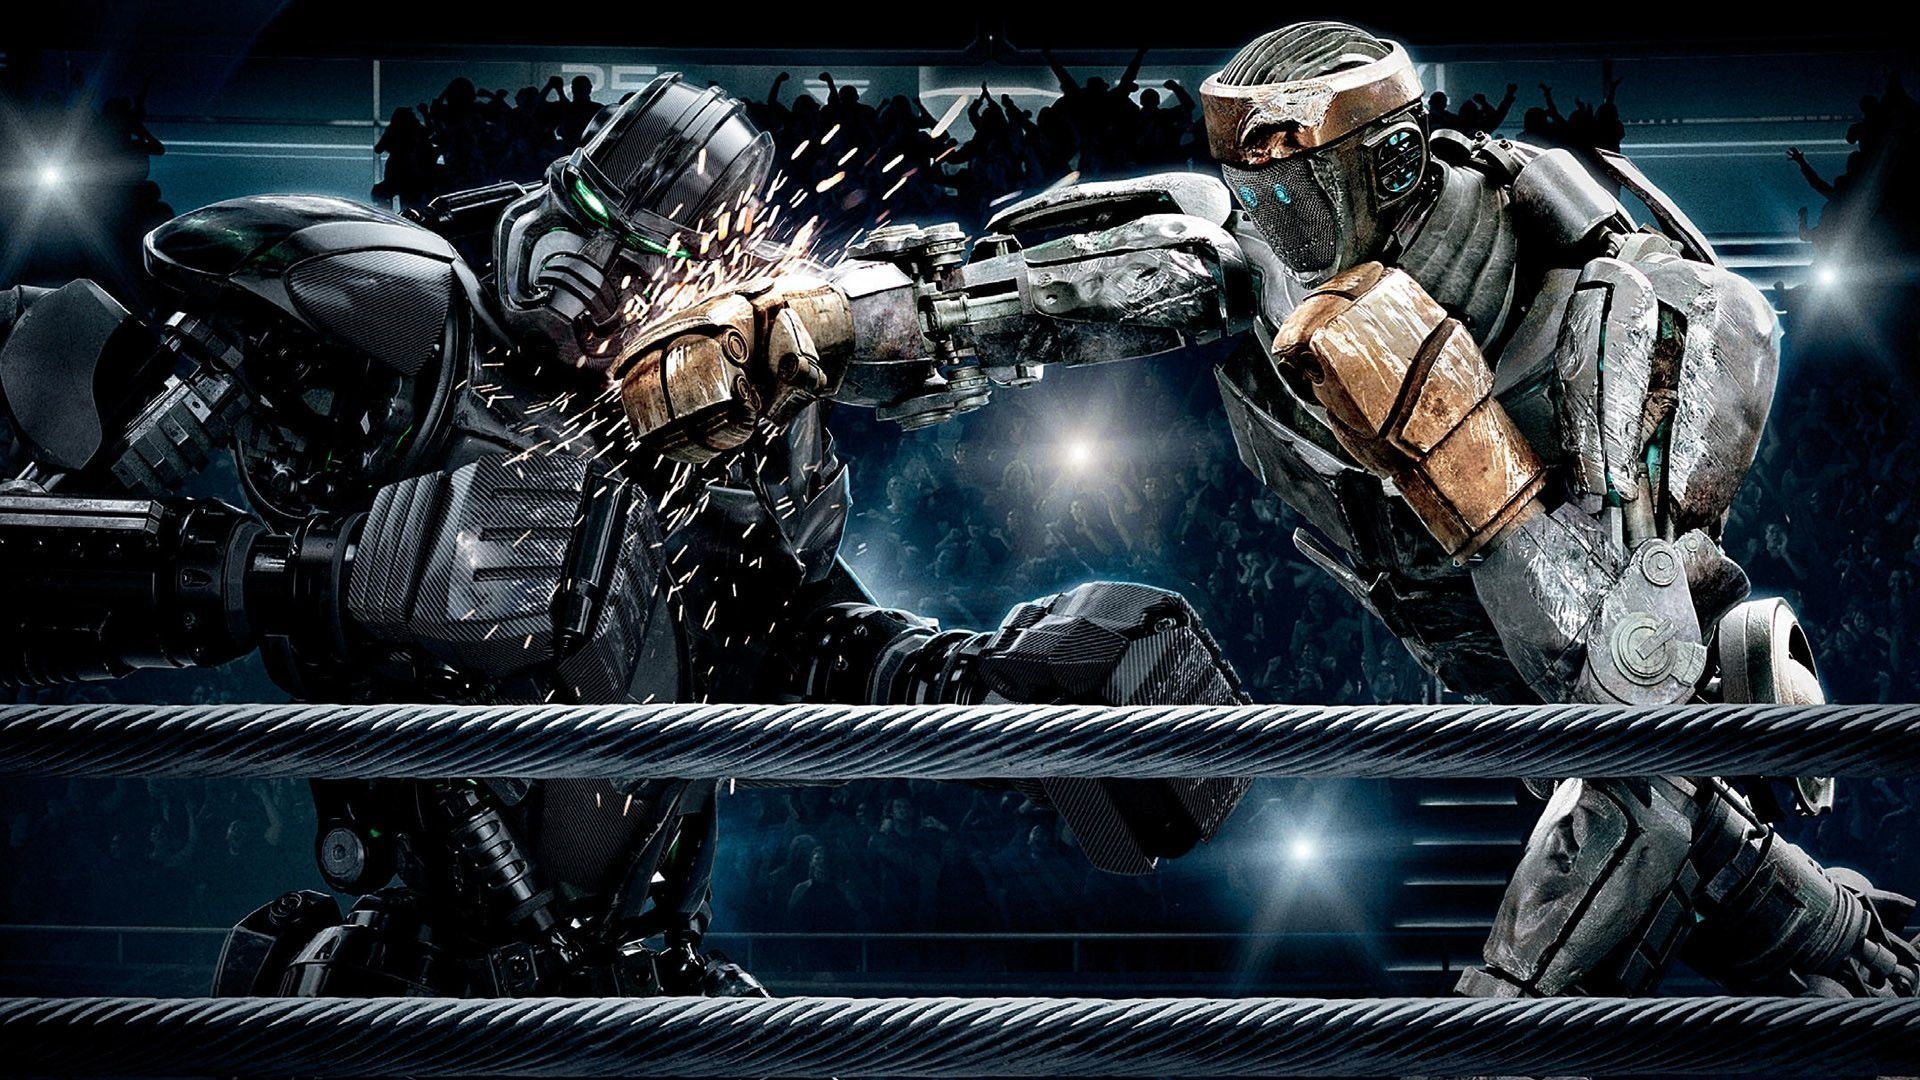 Real Steel: A sci-fi movie directed by Shawn Levy, Robots. 1920x1080 Full HD Background.